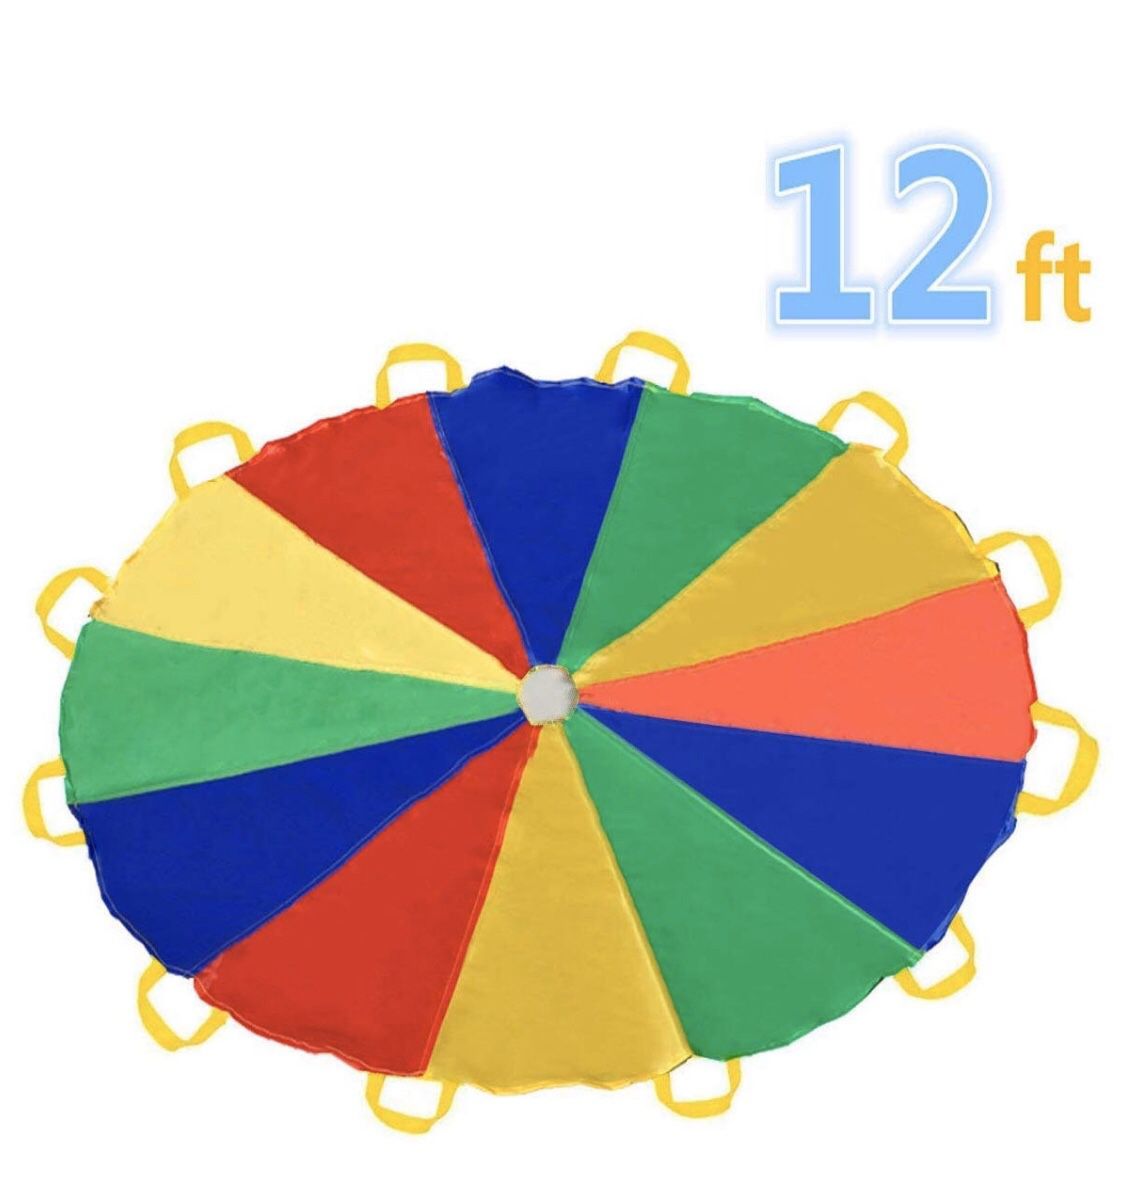 Parachute 12 Foot for Kids with 12 Handles Play Parachute for 8 12 Kids Tent Cooperative Games Birth